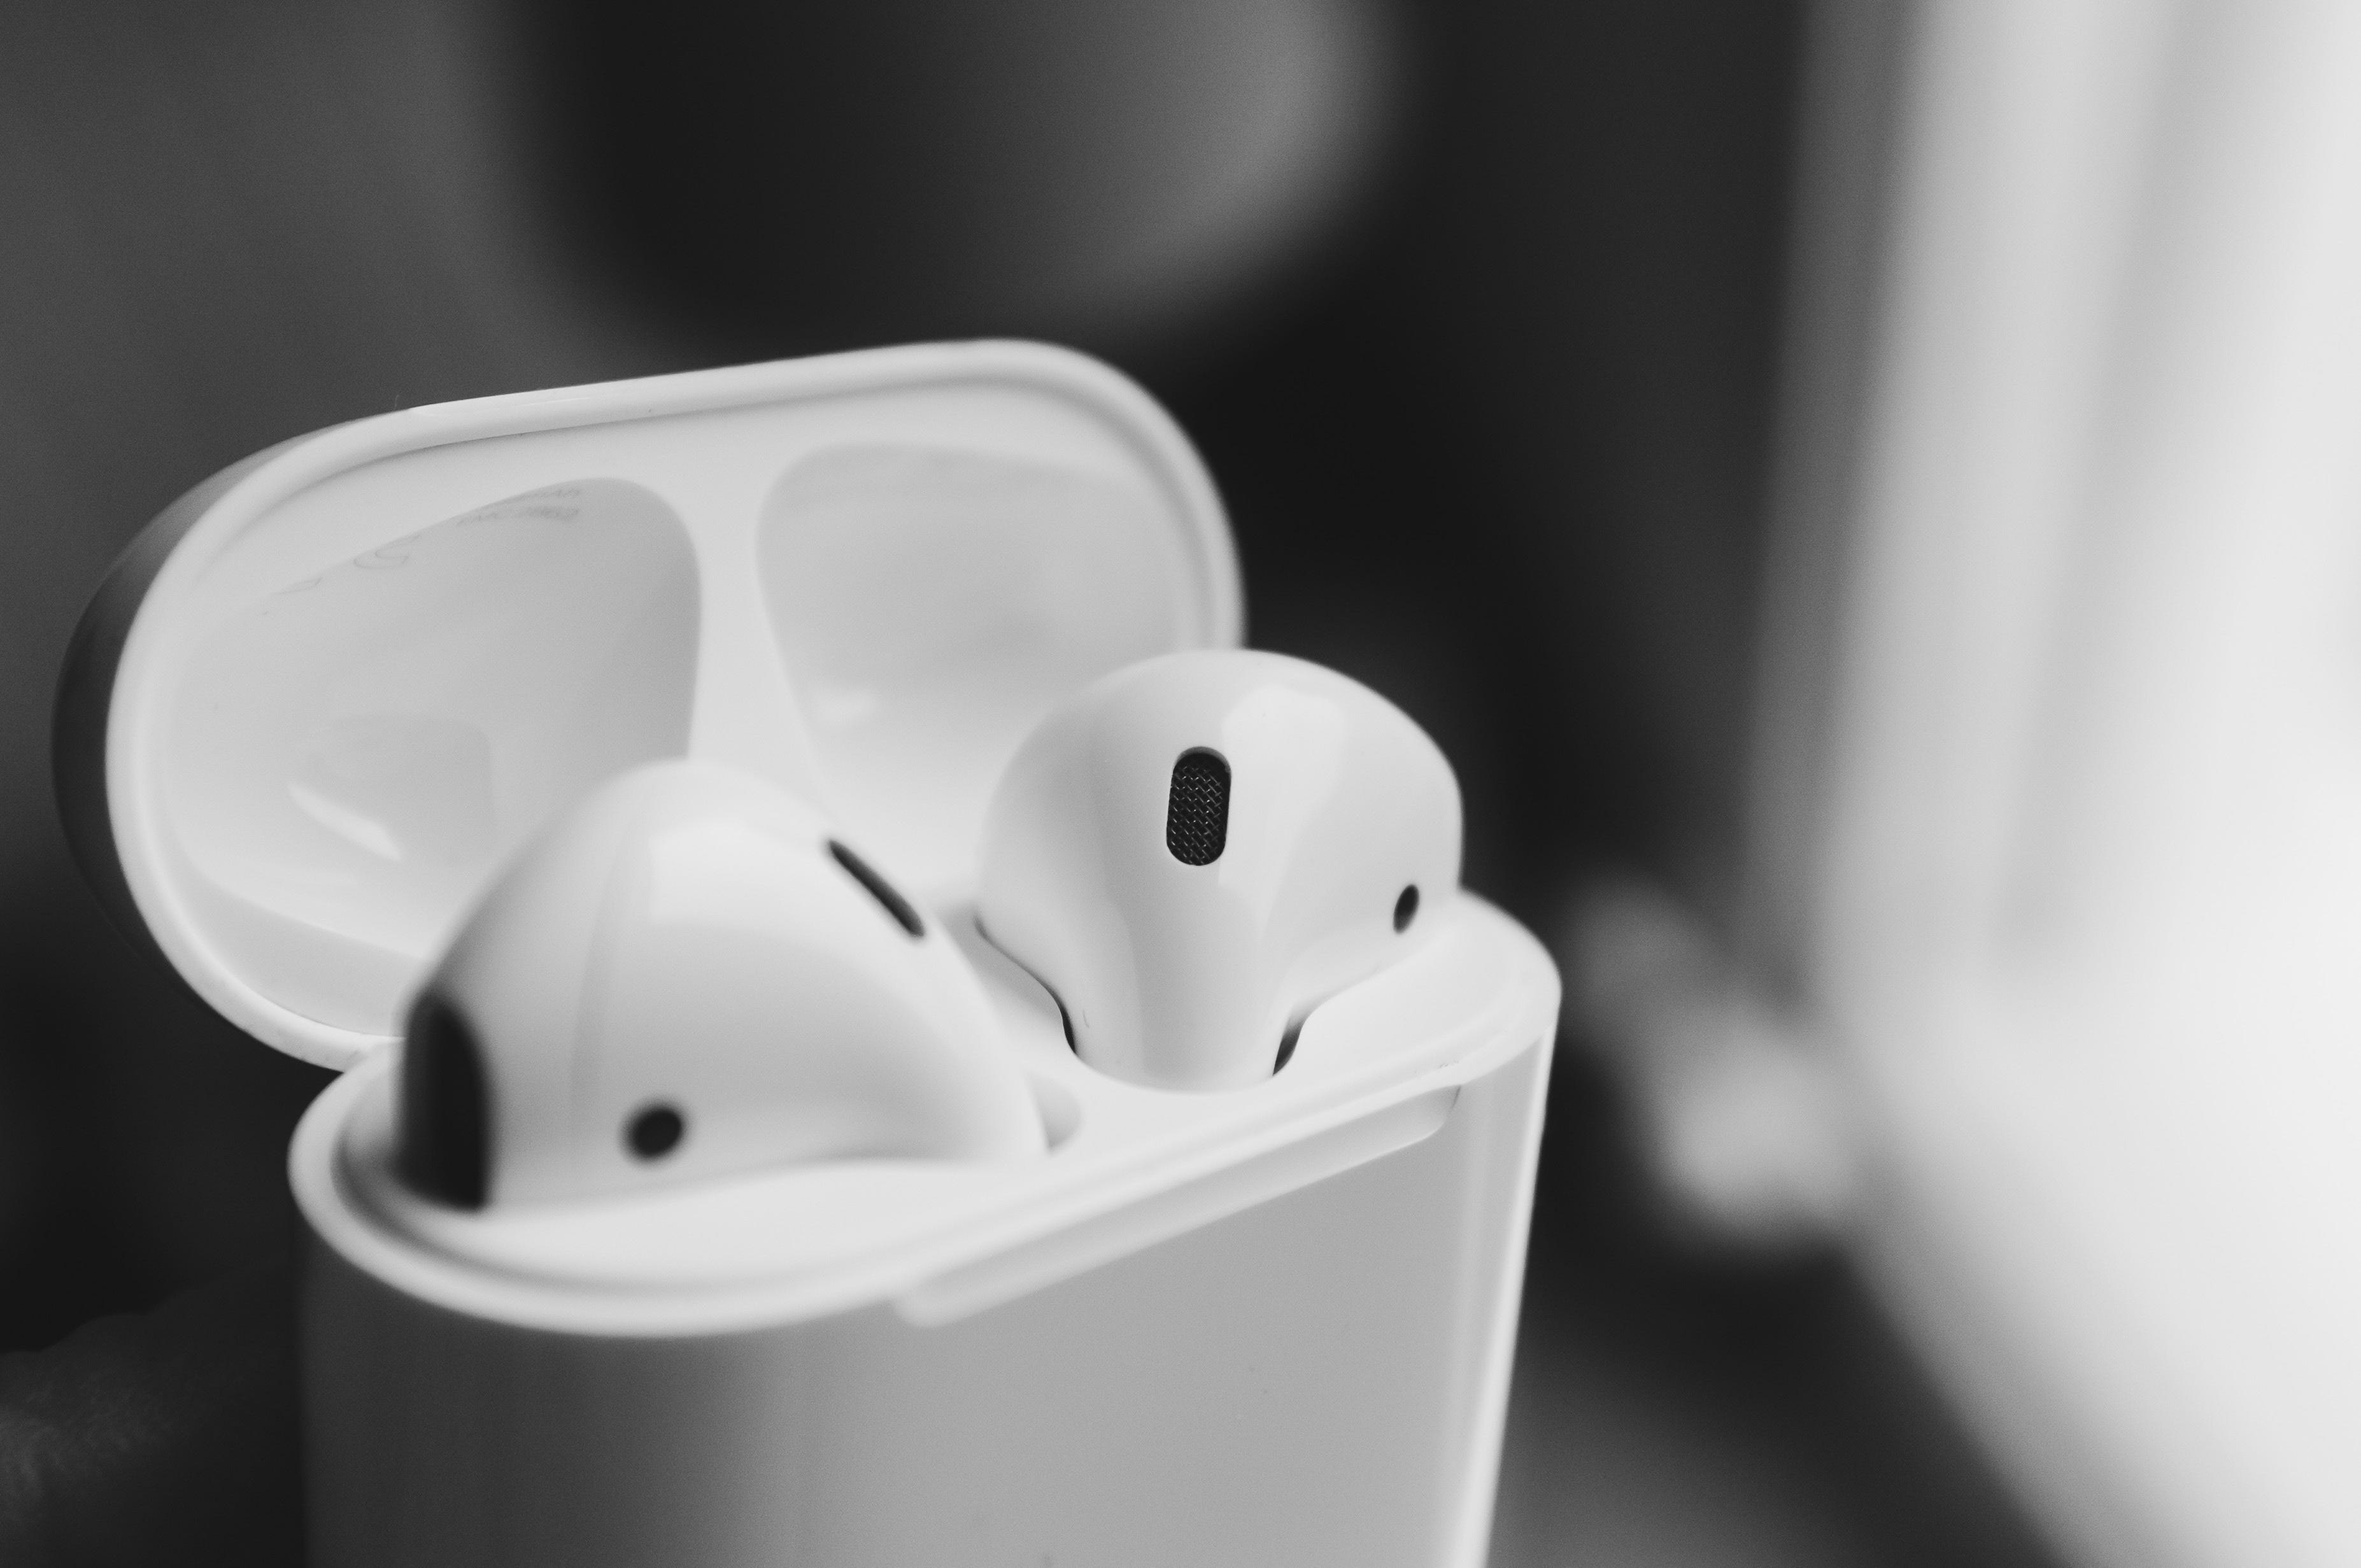 Airpods батарея. Эирподс 2. Наушники Air pods Pro 2. Apple AIRPODS 1. Apple AIRPODS Pro 2.